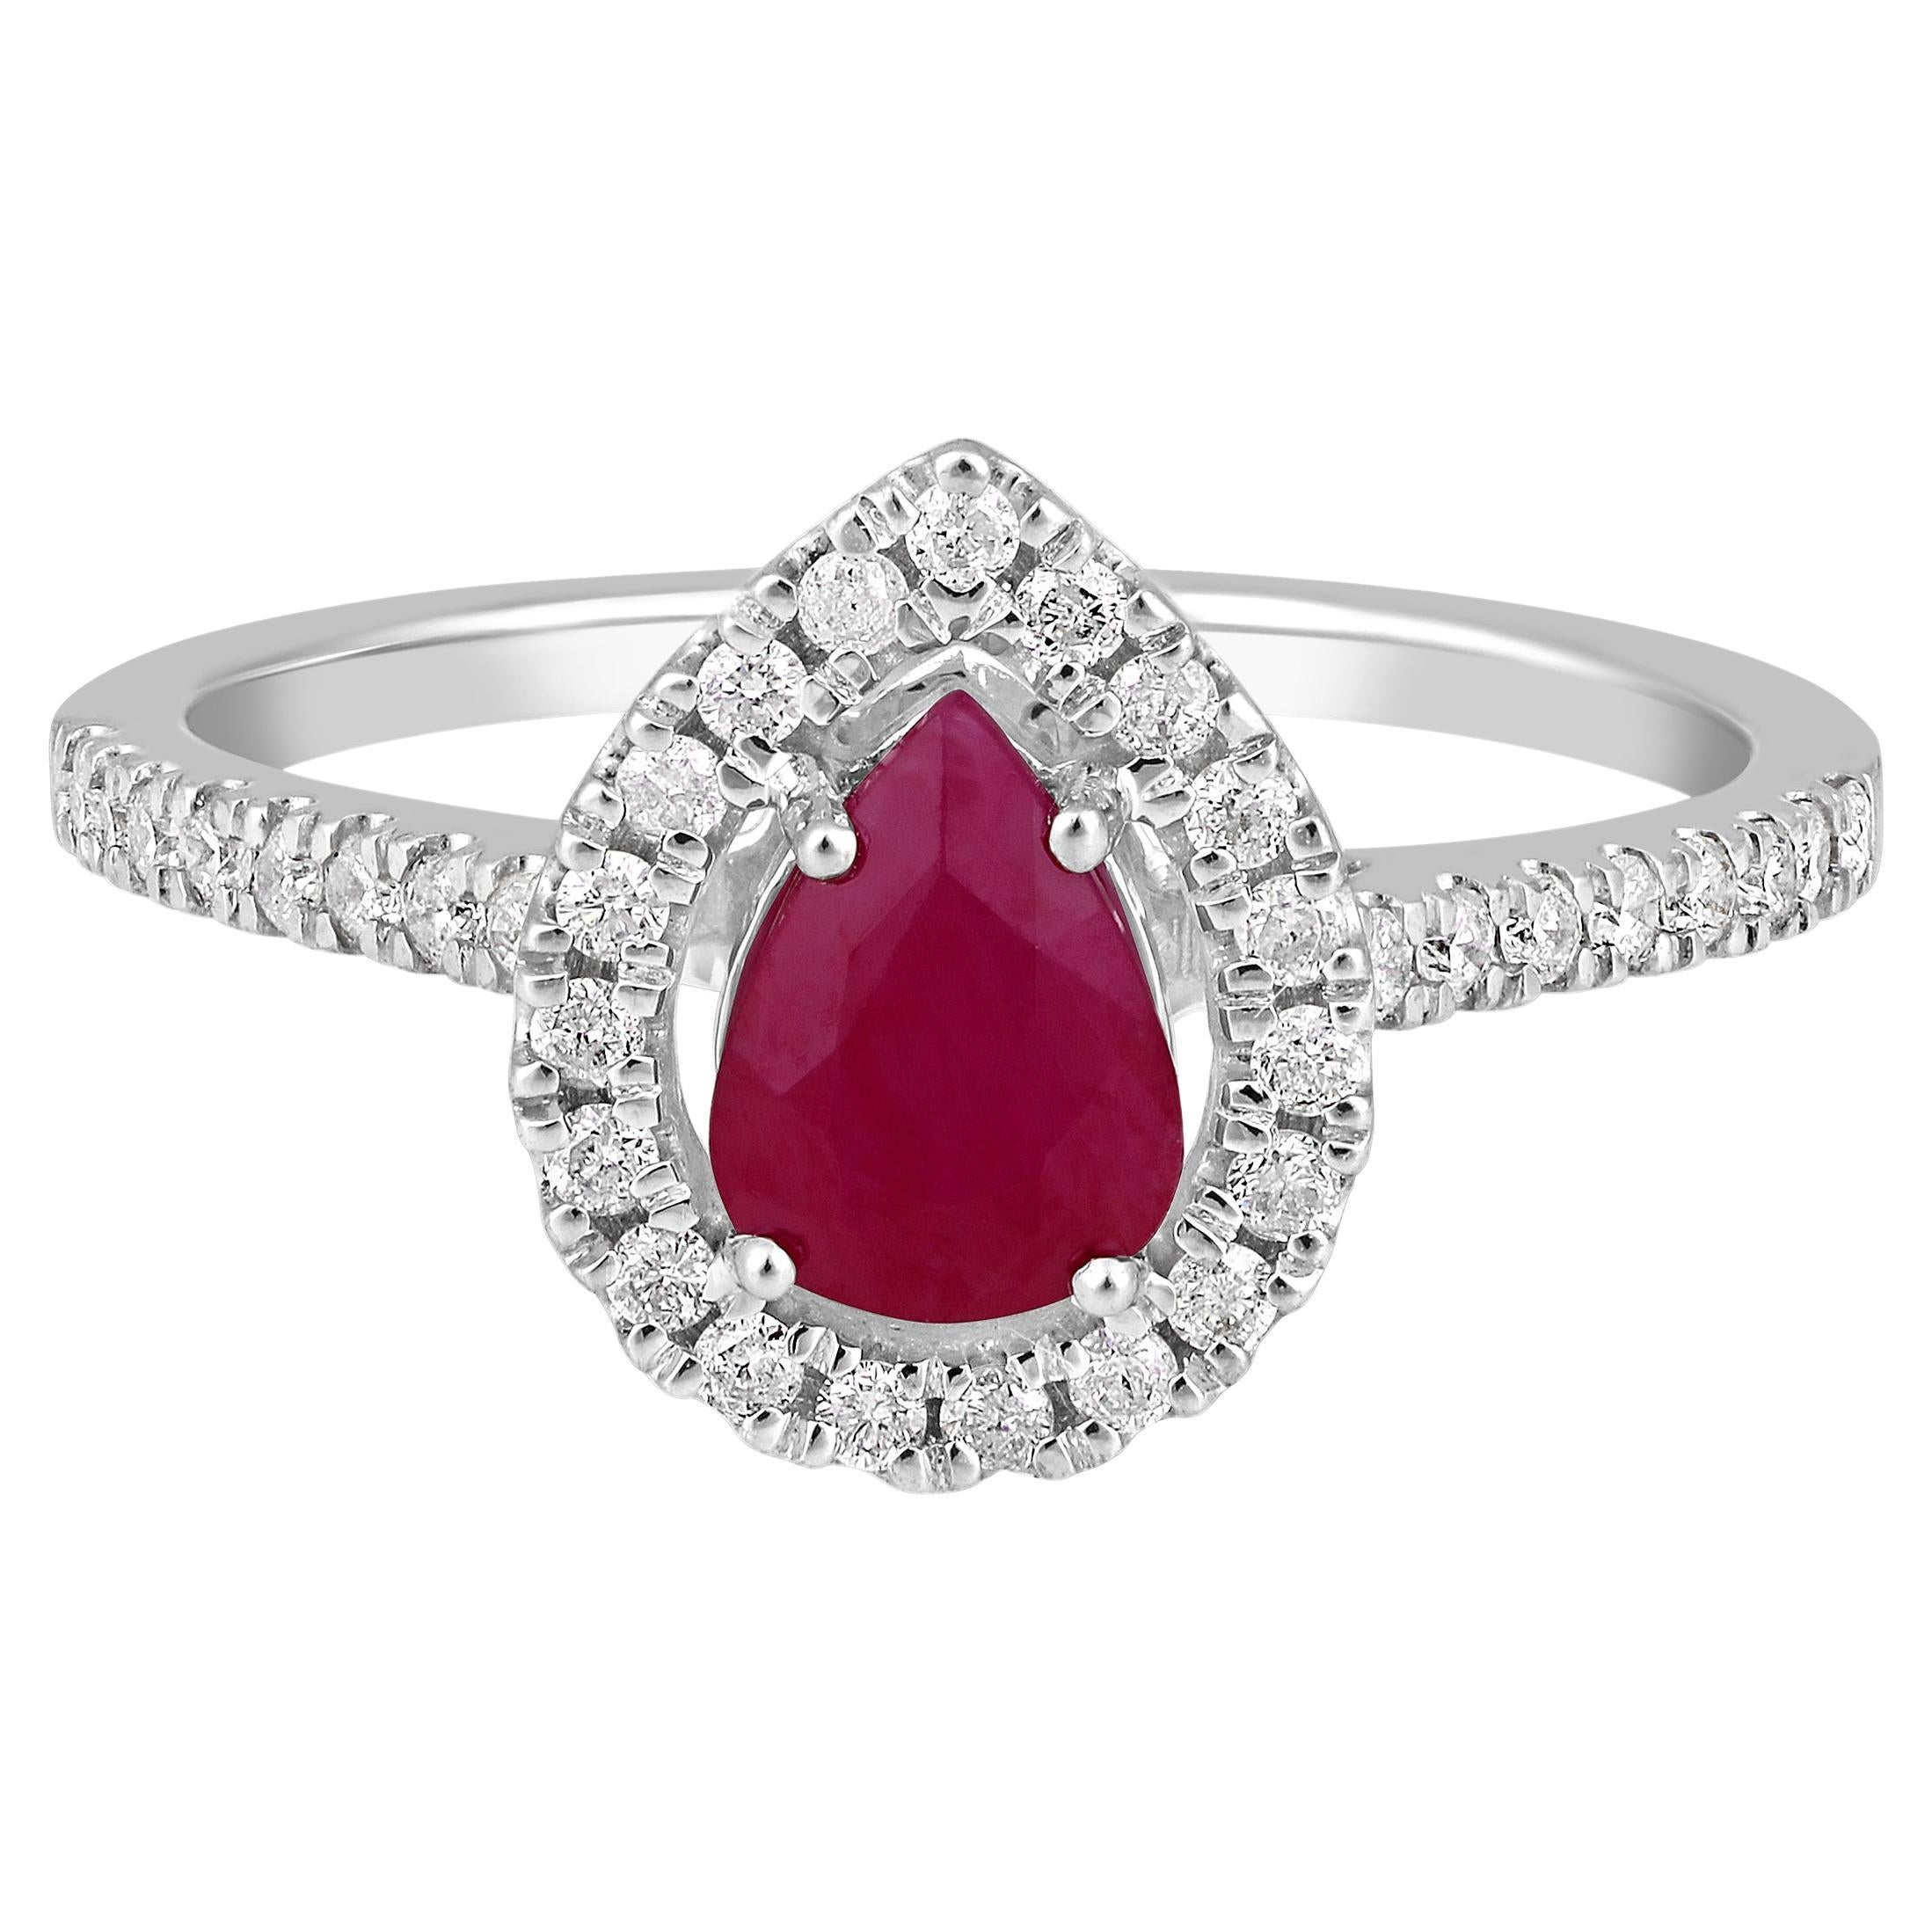 Certified 14K Gold 1.24ct Natural Diamond w/ Ruby Pear Solitaire Halo Ring